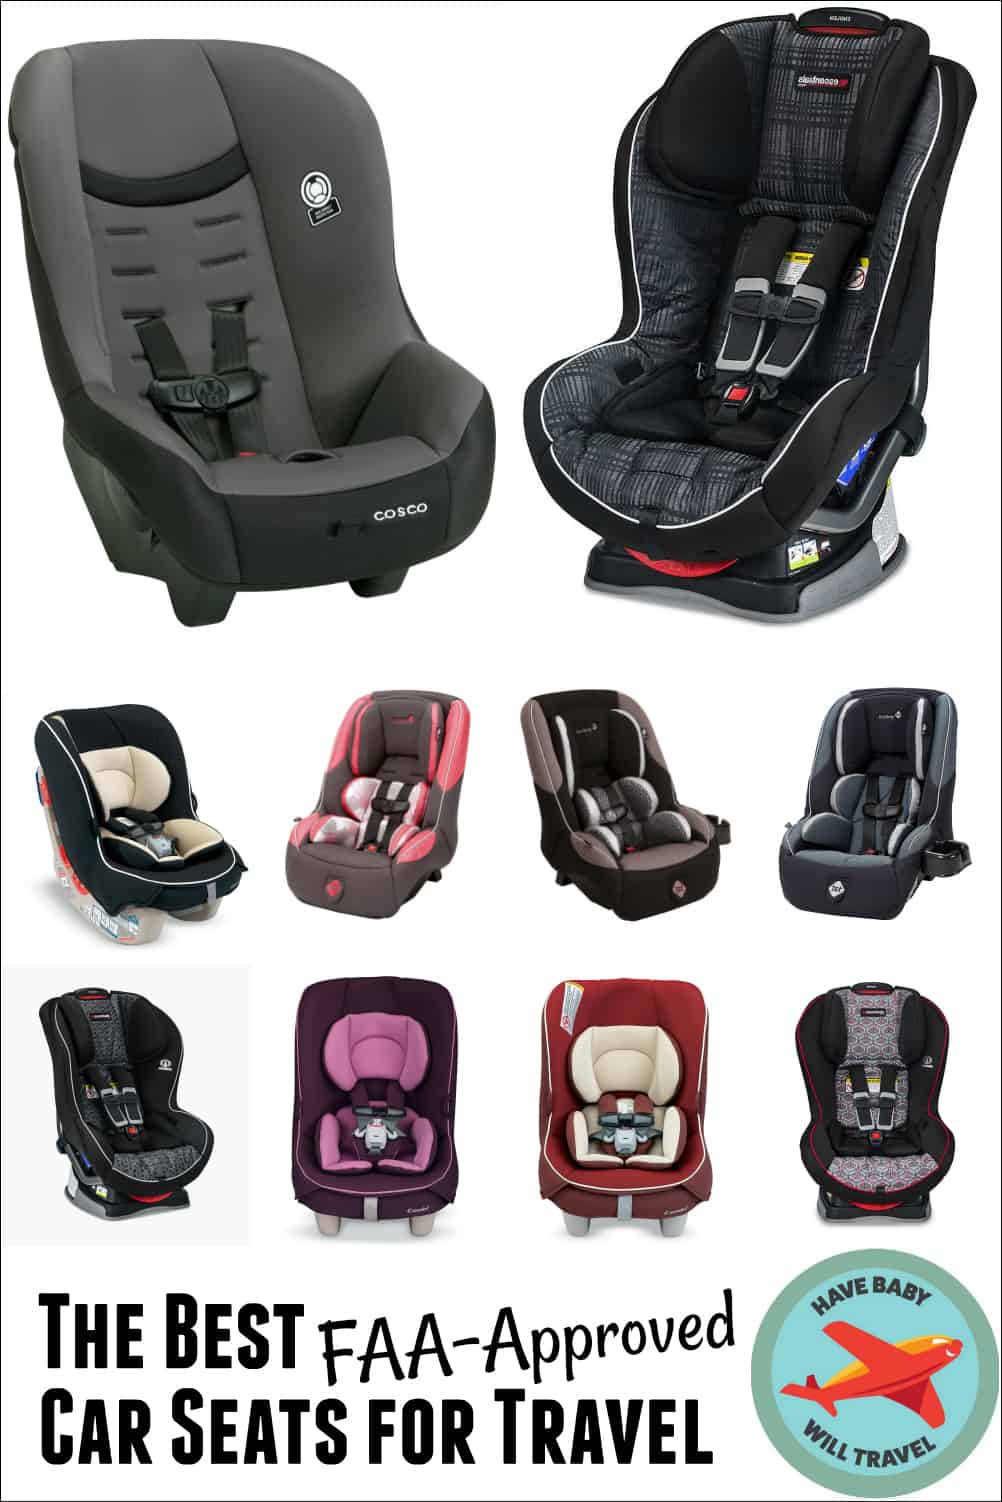 Graco 4ever Car Seat Faa Approved Maldabeauty Com - Is The Graco 4ever Car Seat Faa Approved